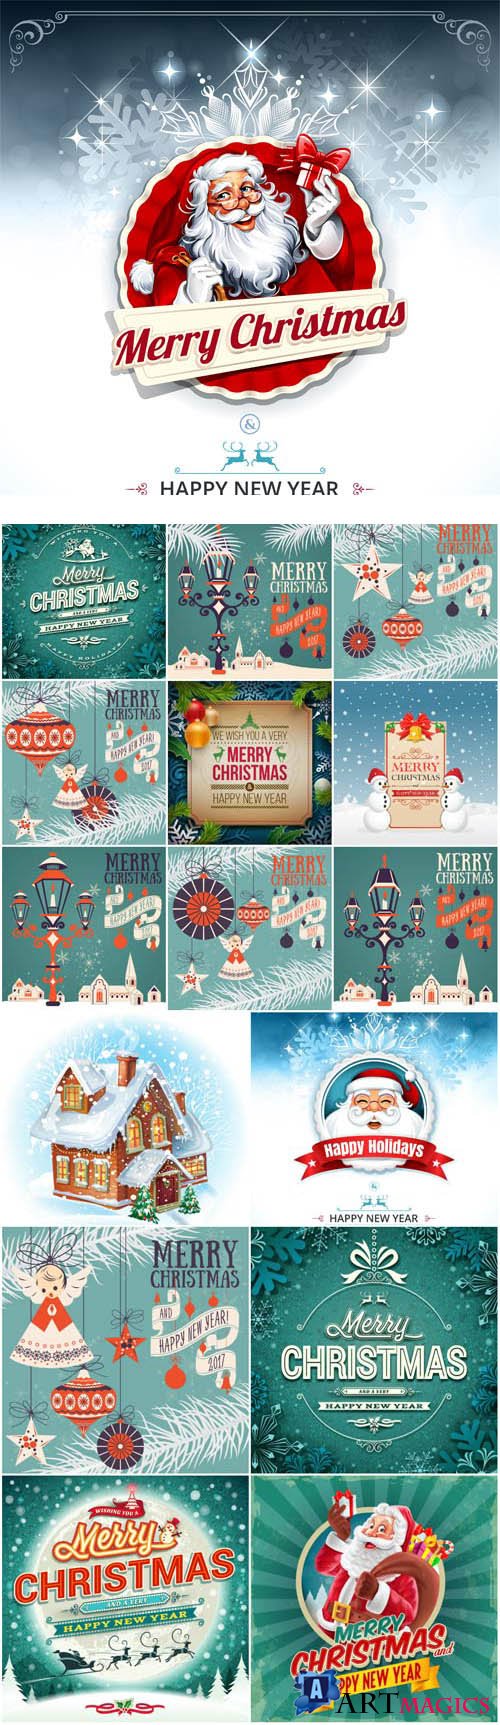 New Year and Christmas illustrations in vector 58